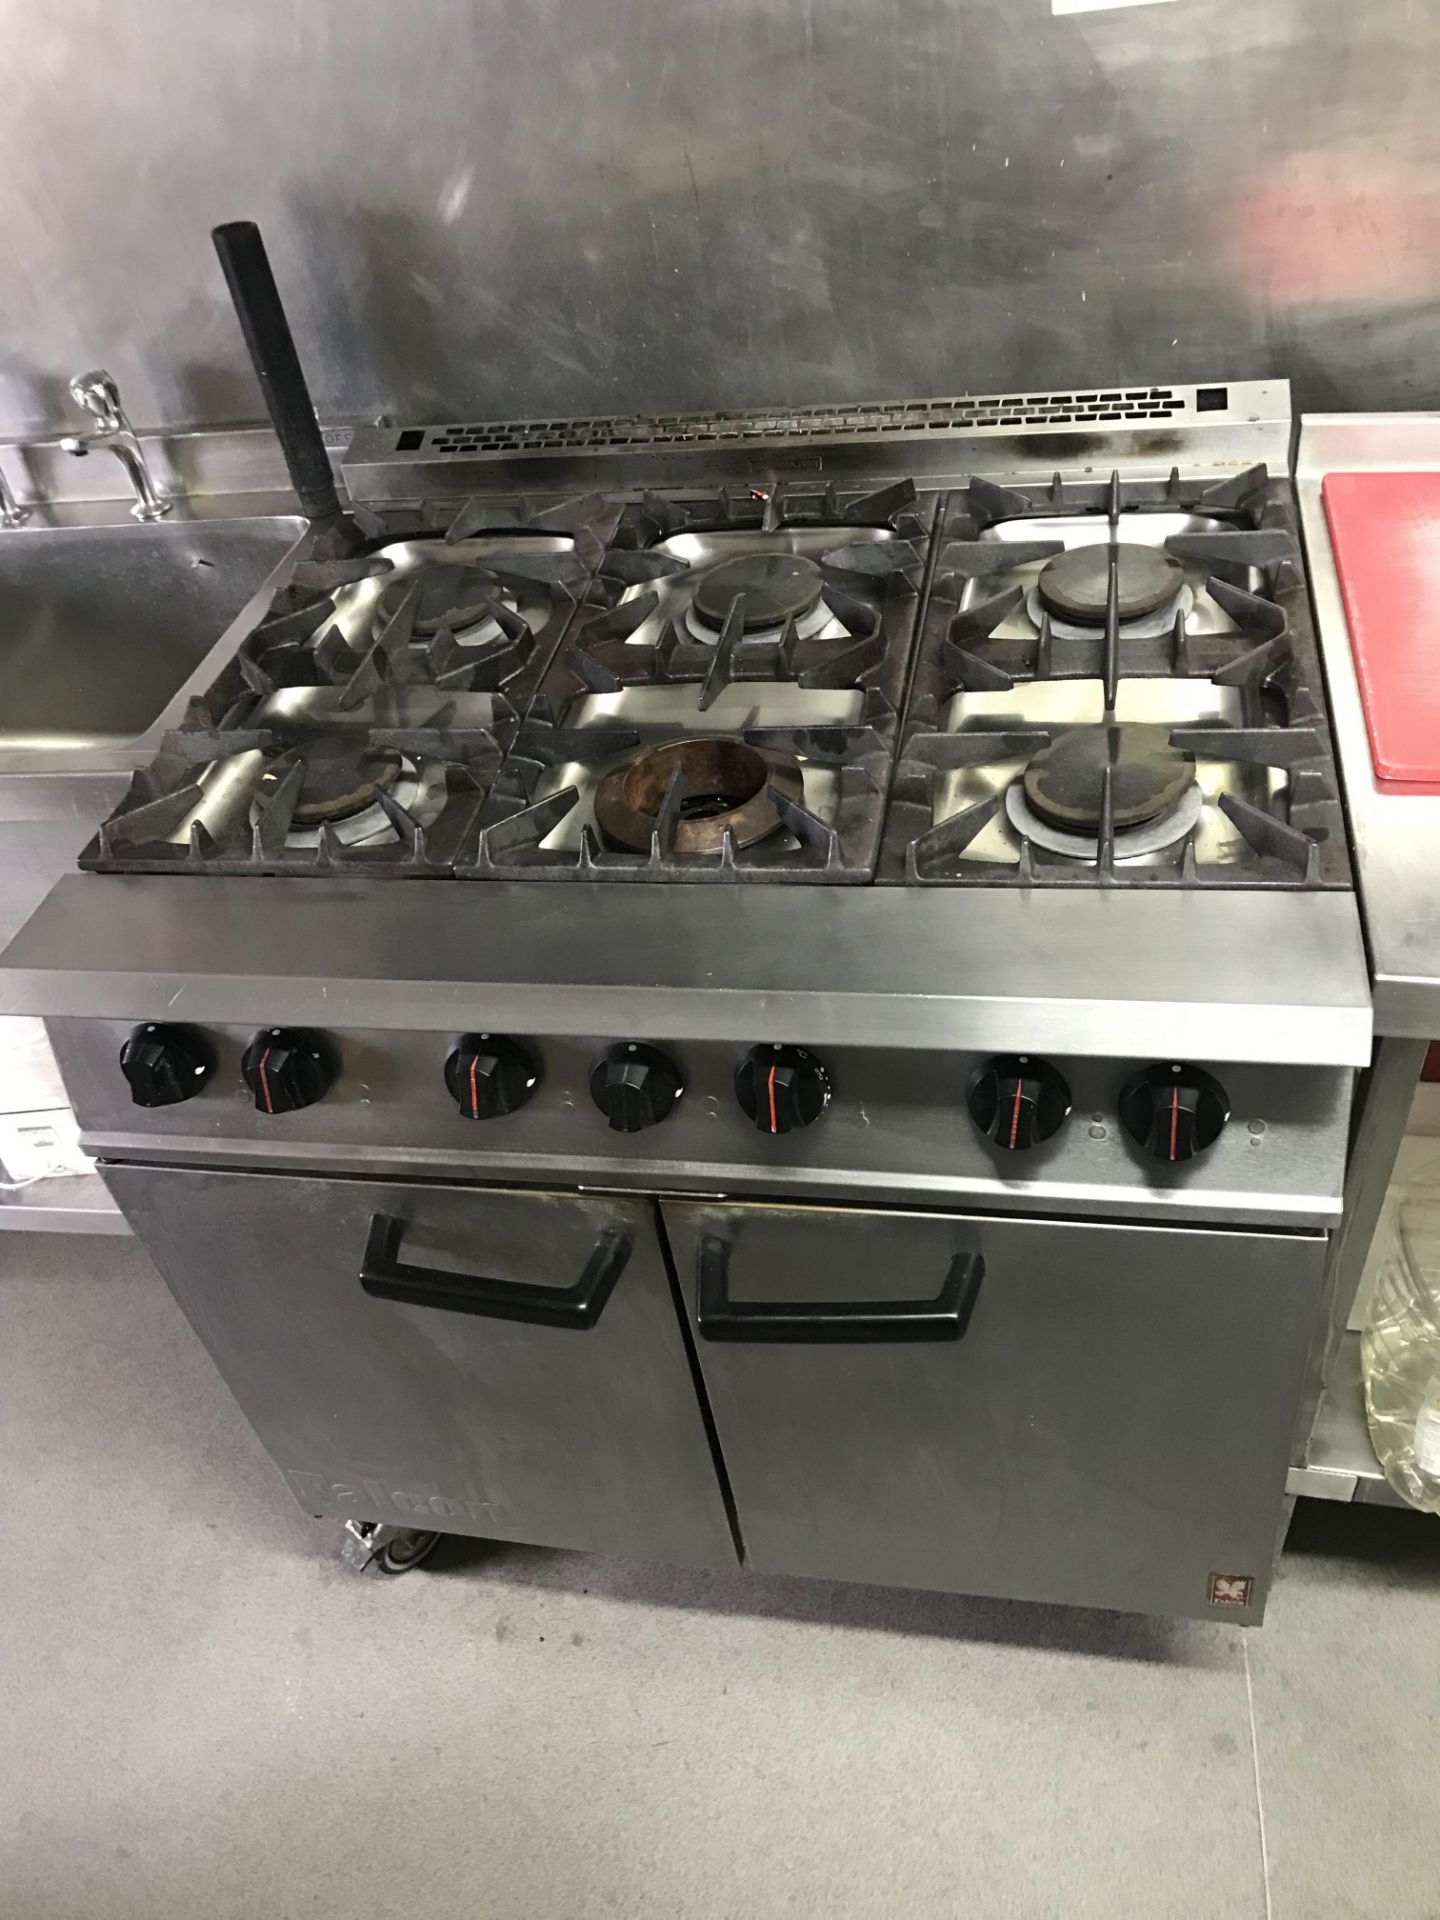 Falcon 6 Burner Gas Range with Oven - Image 2 of 5